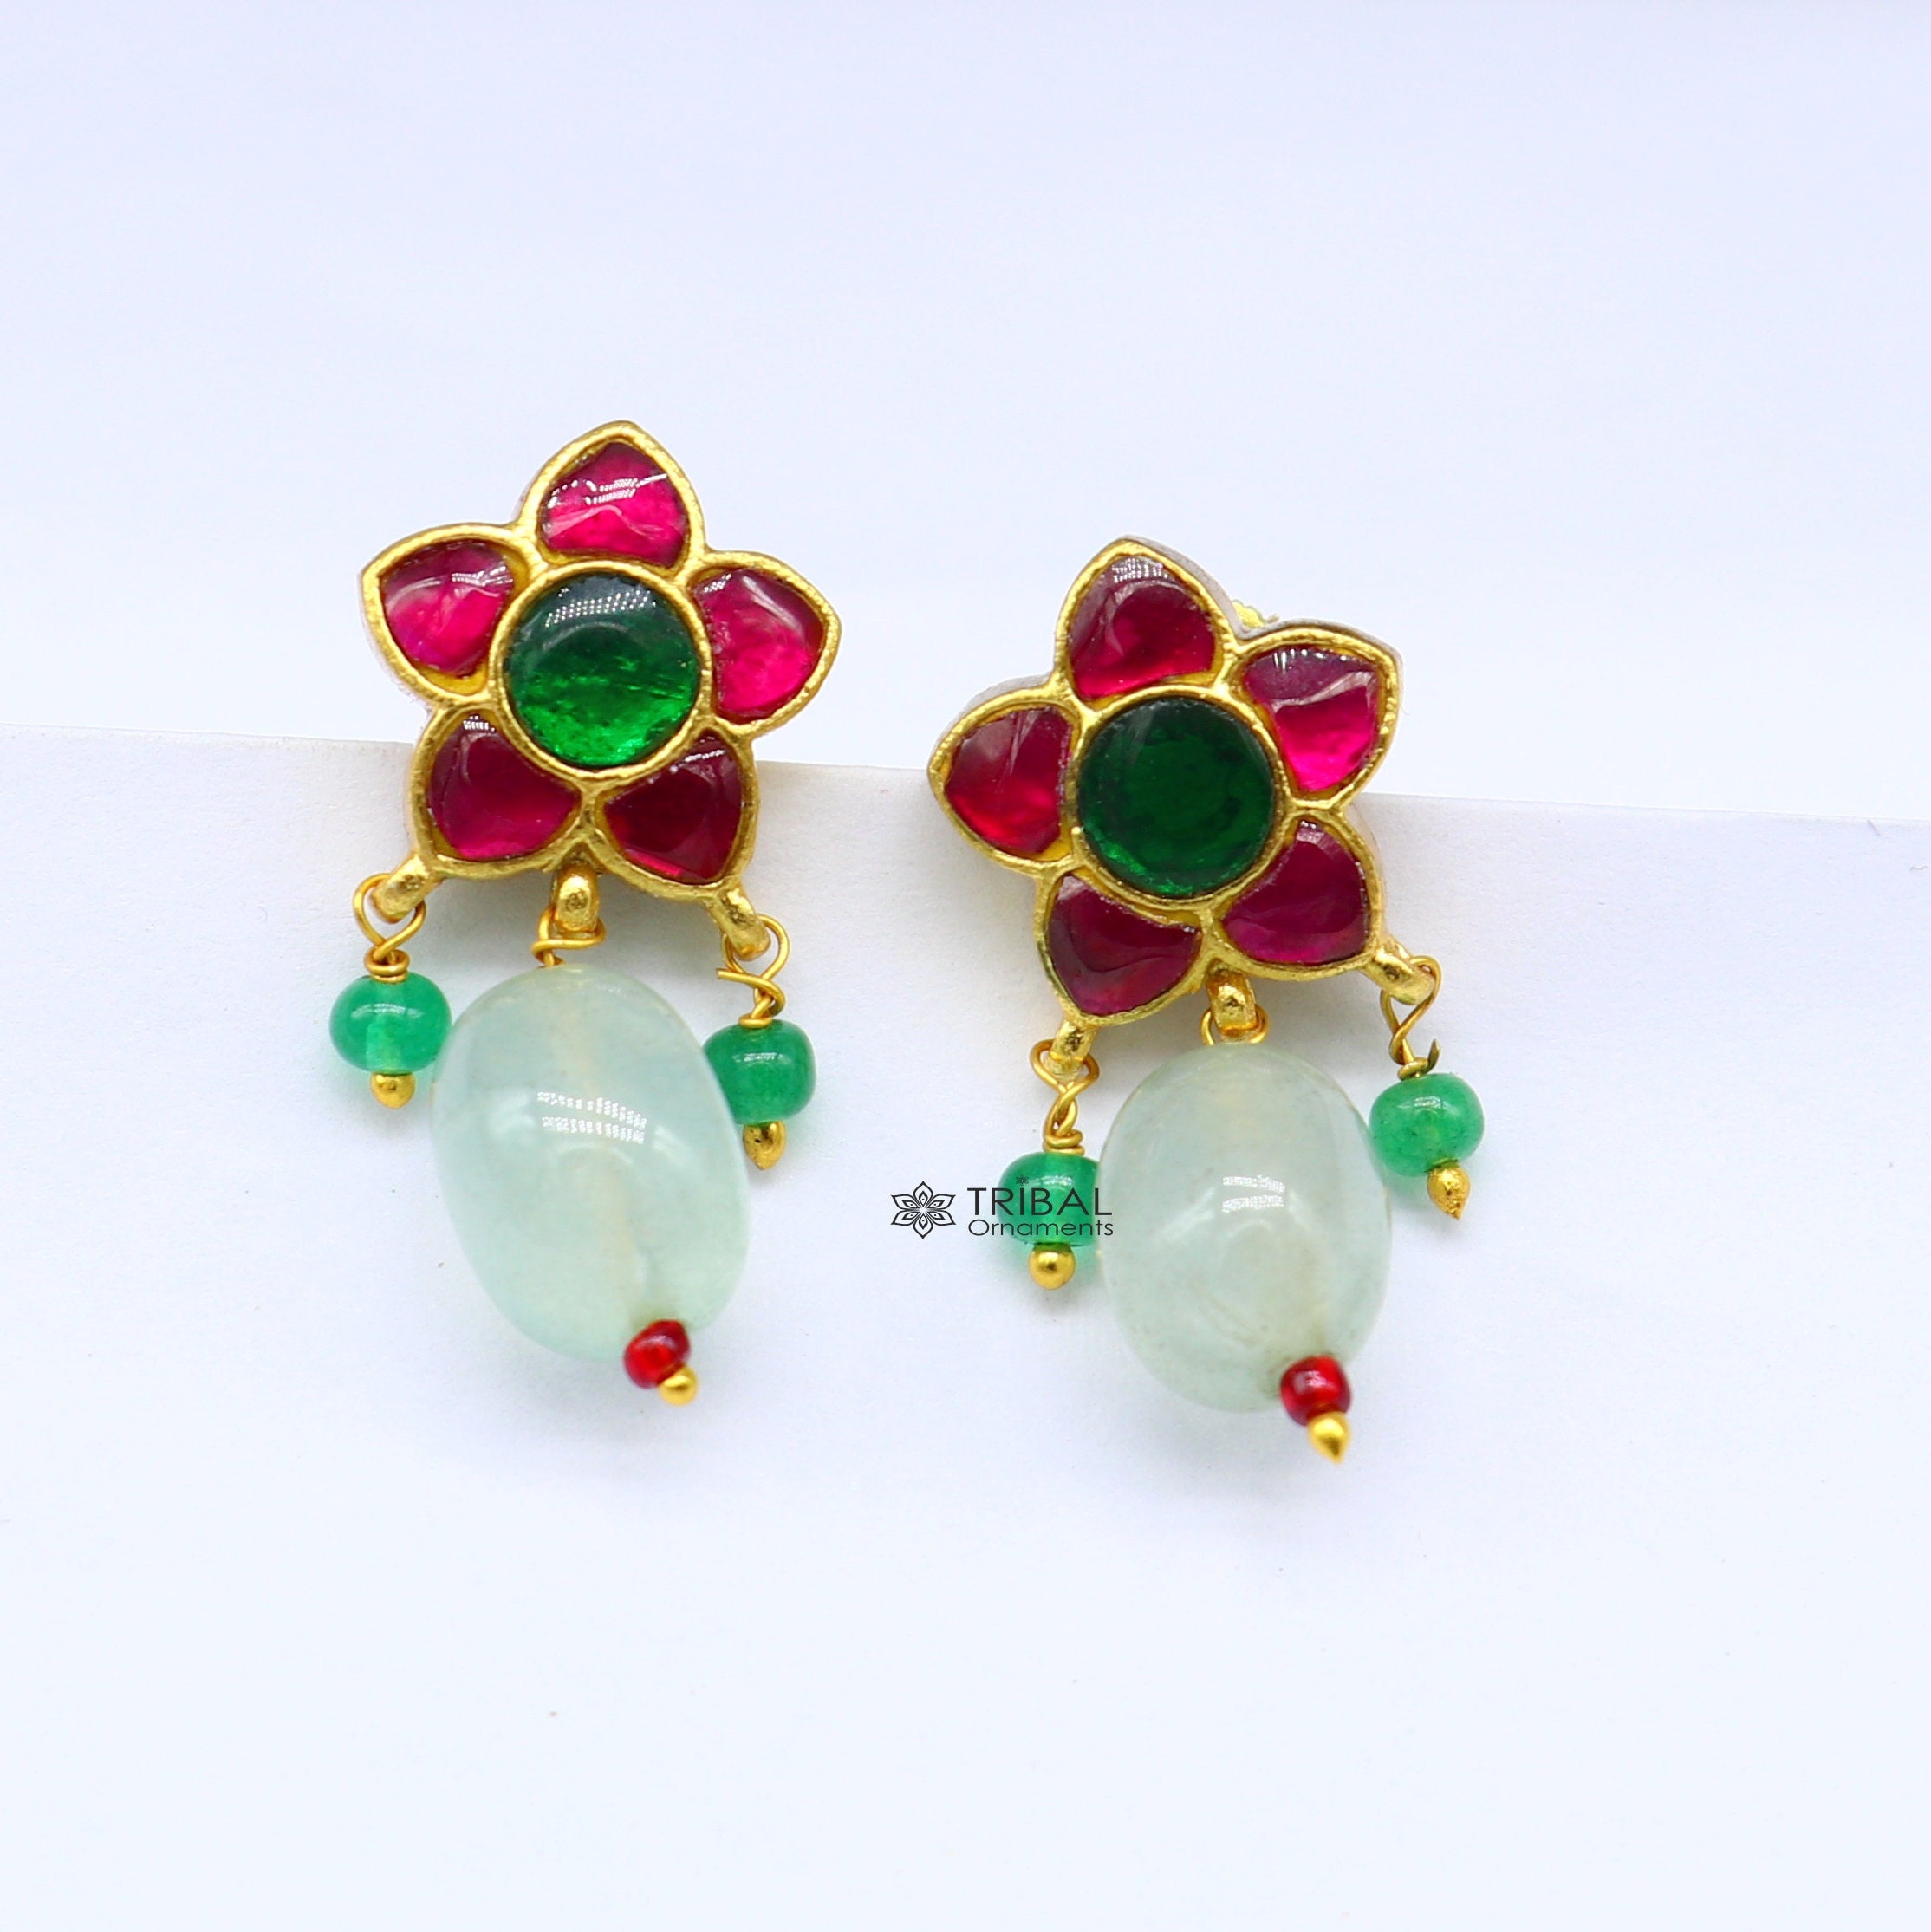 Discover 232+ indian handmade earrings latest